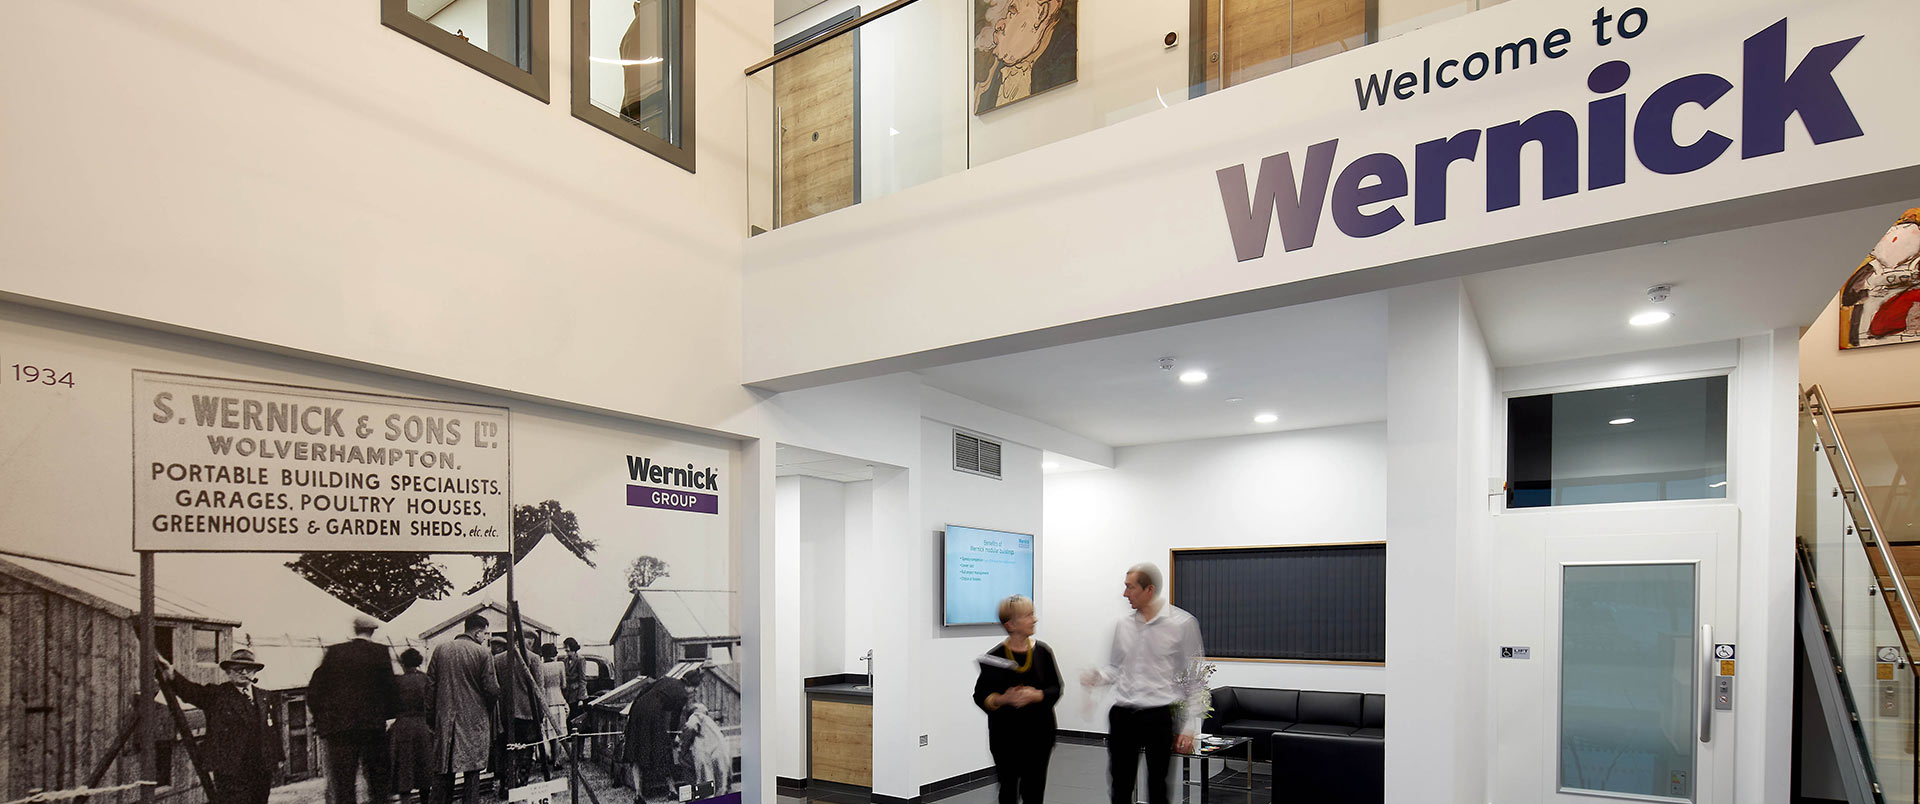 WERNICK GROUPS INVESTMENT TOPS £200M OVER 5 YEARS